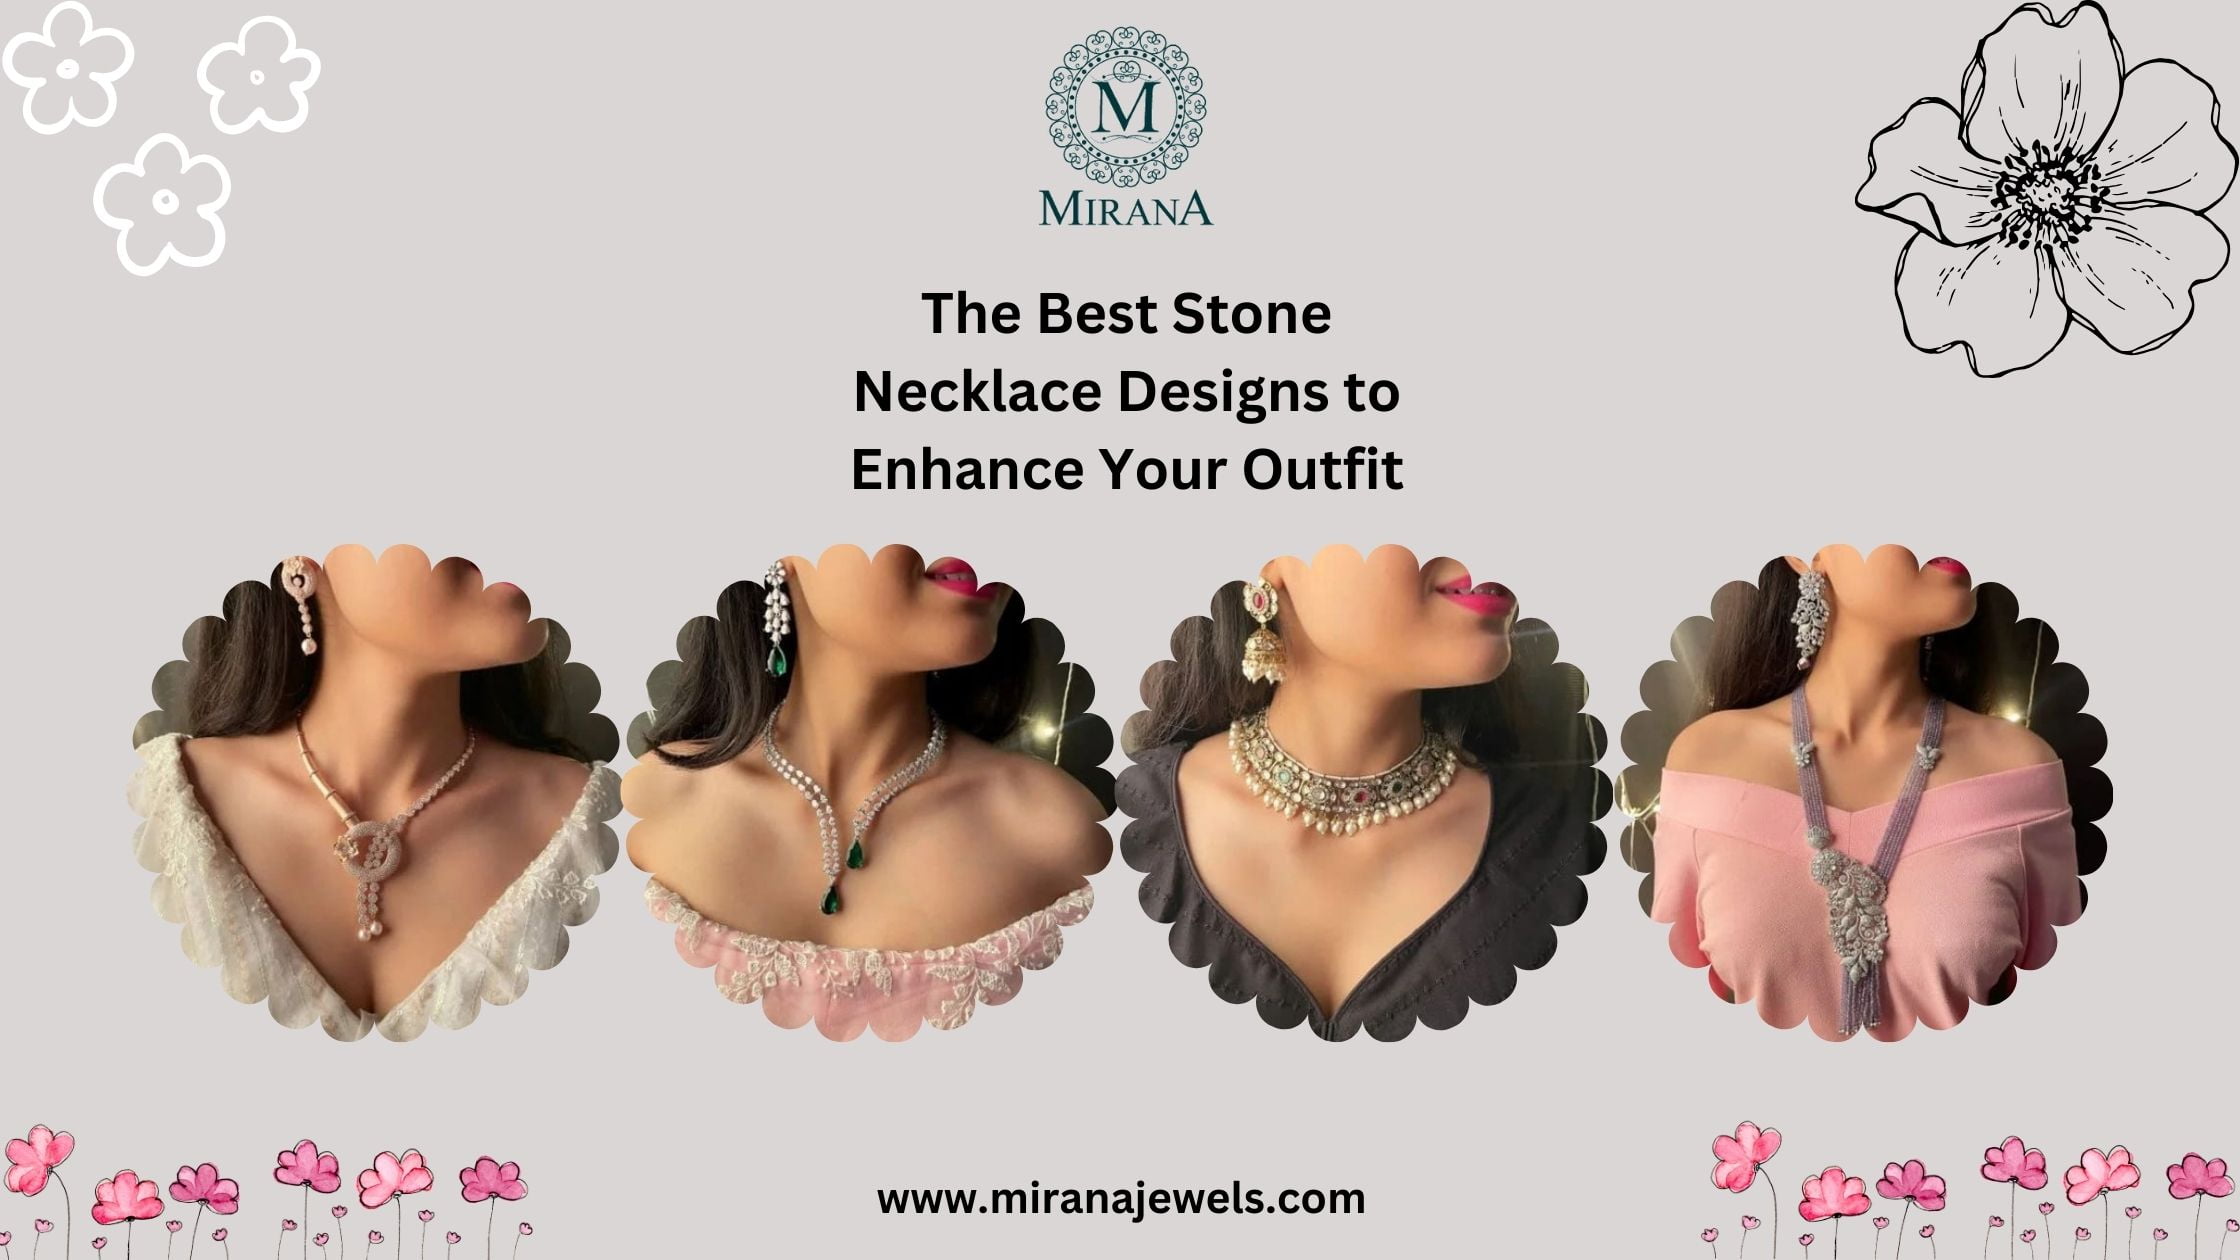 The Best Stone Necklace Designs to Enhance Your Outfit